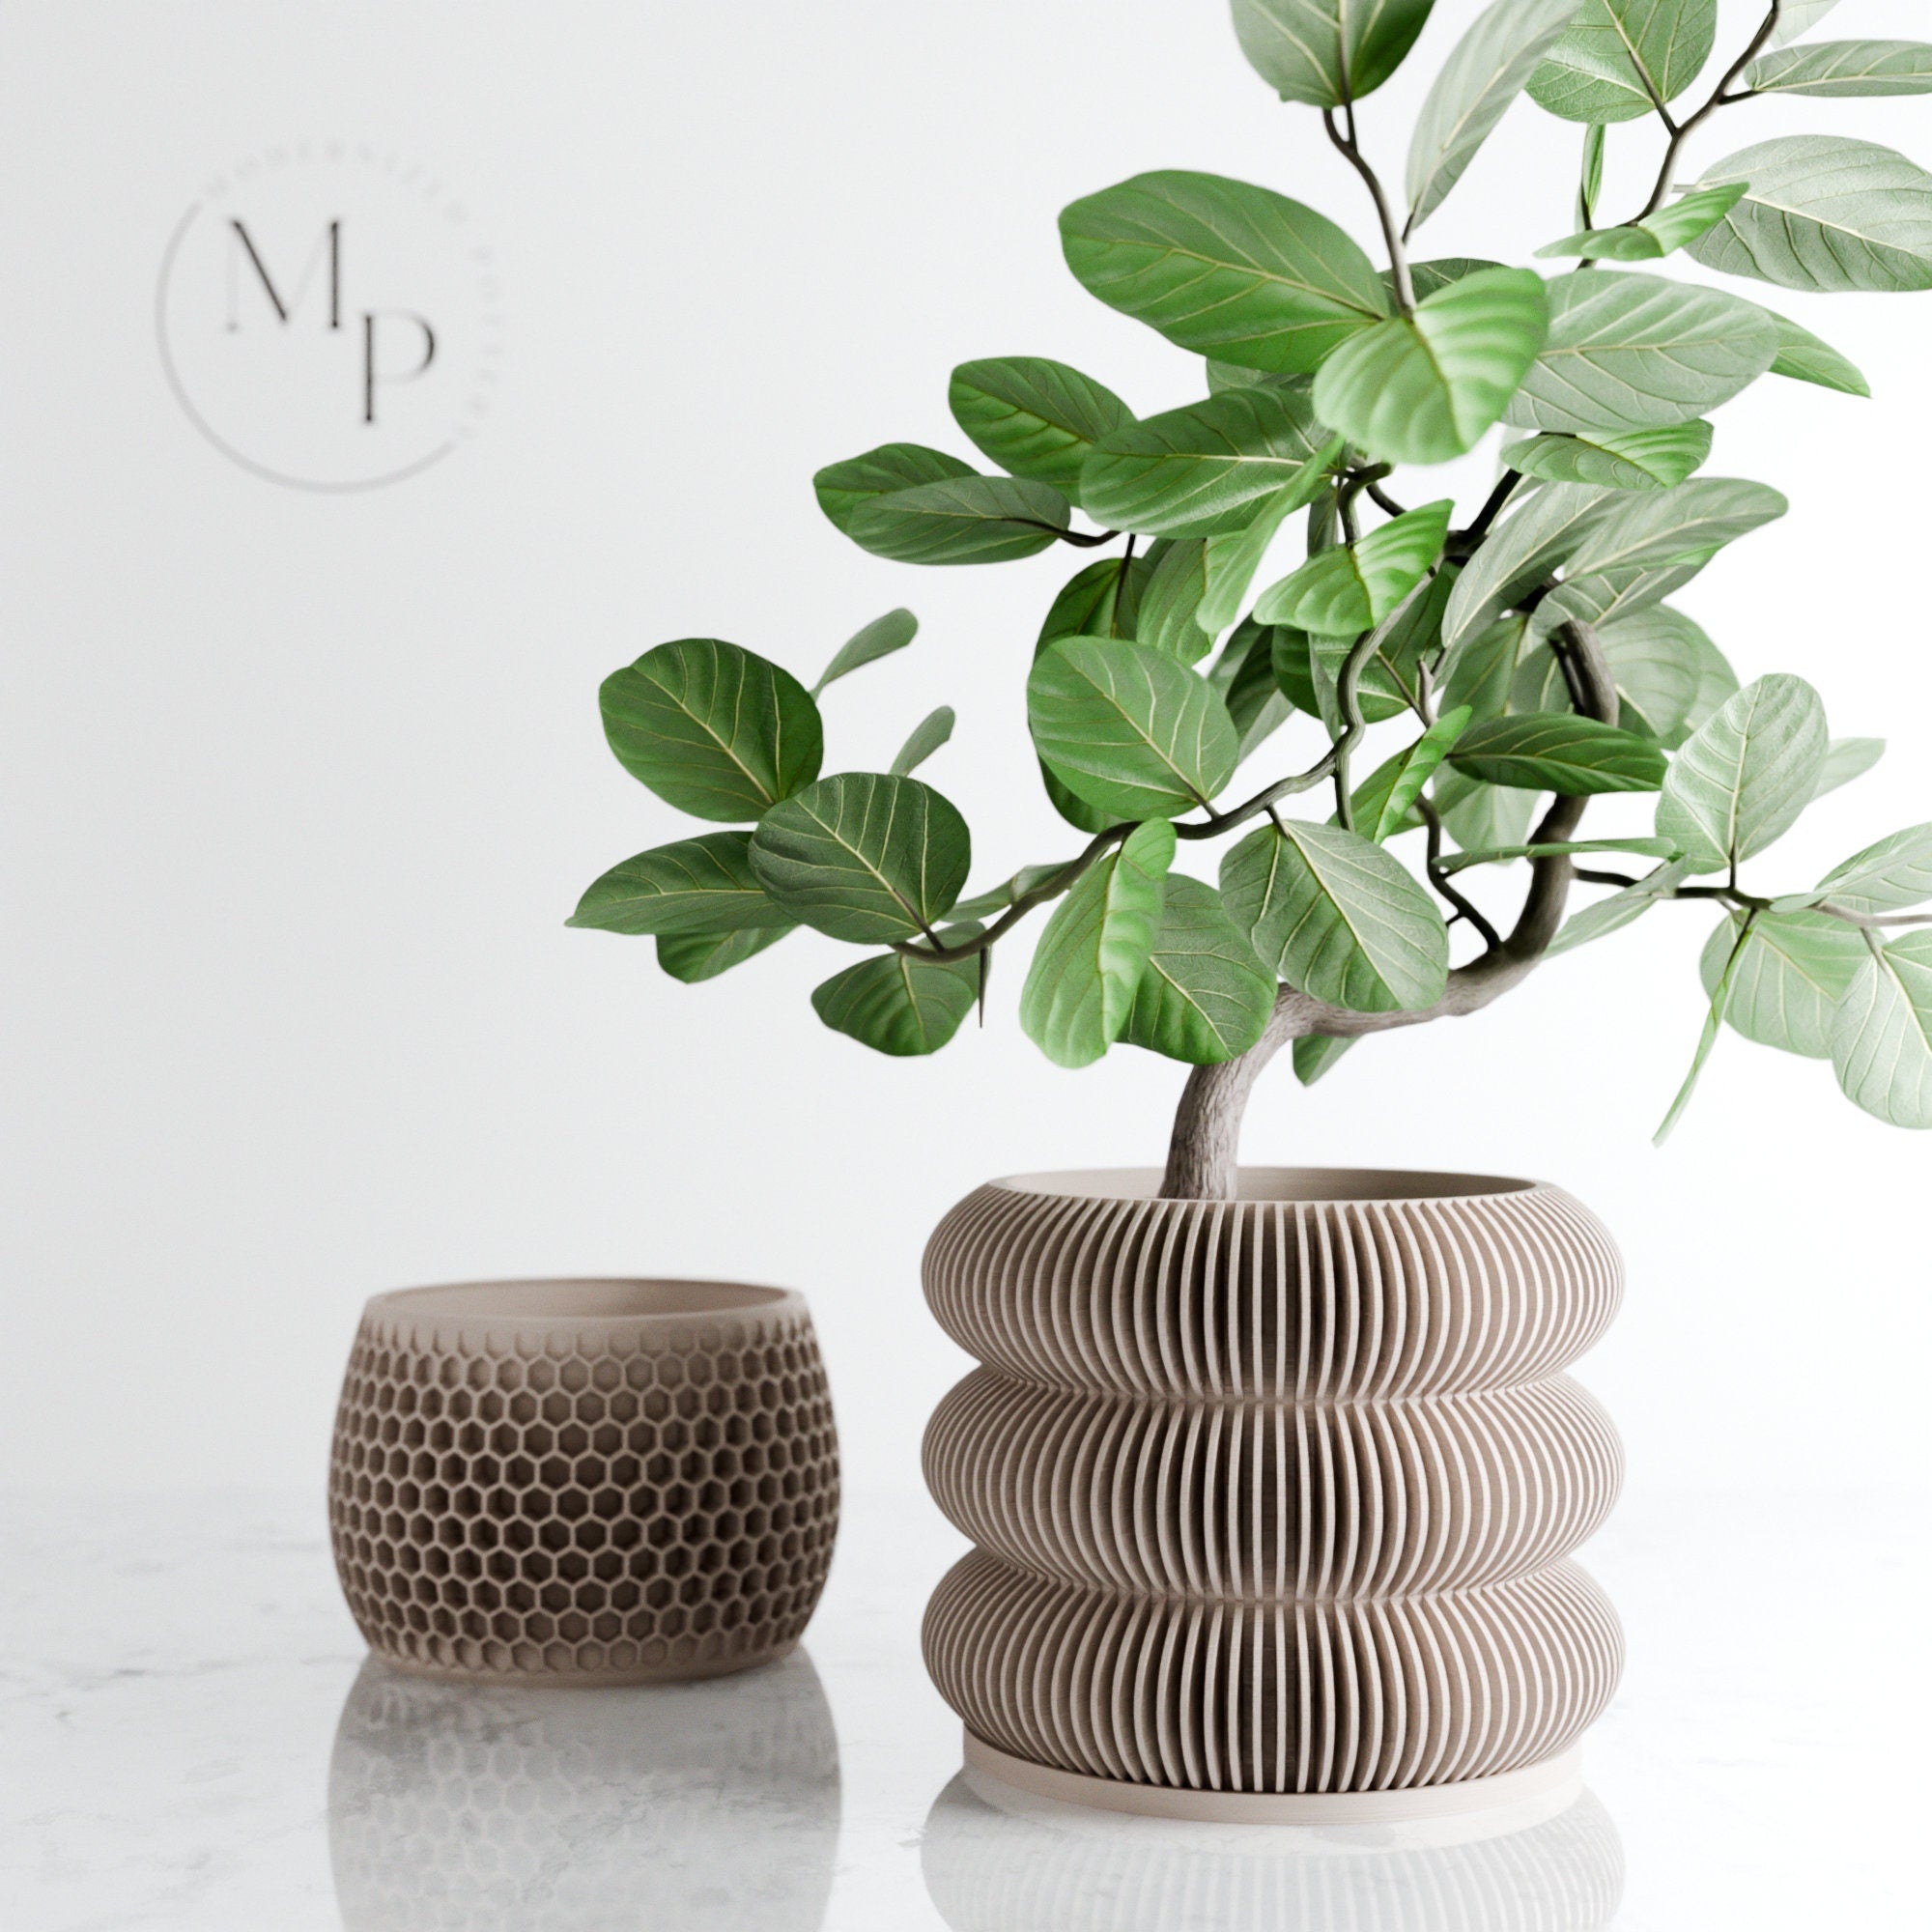 Wood BUBBLES Planter, 9 Color Options, Unique 3D Printed Plant Pot with Drainage & Saucer For Houseplants, Small to Large, 4 5 6 7 8 Inch